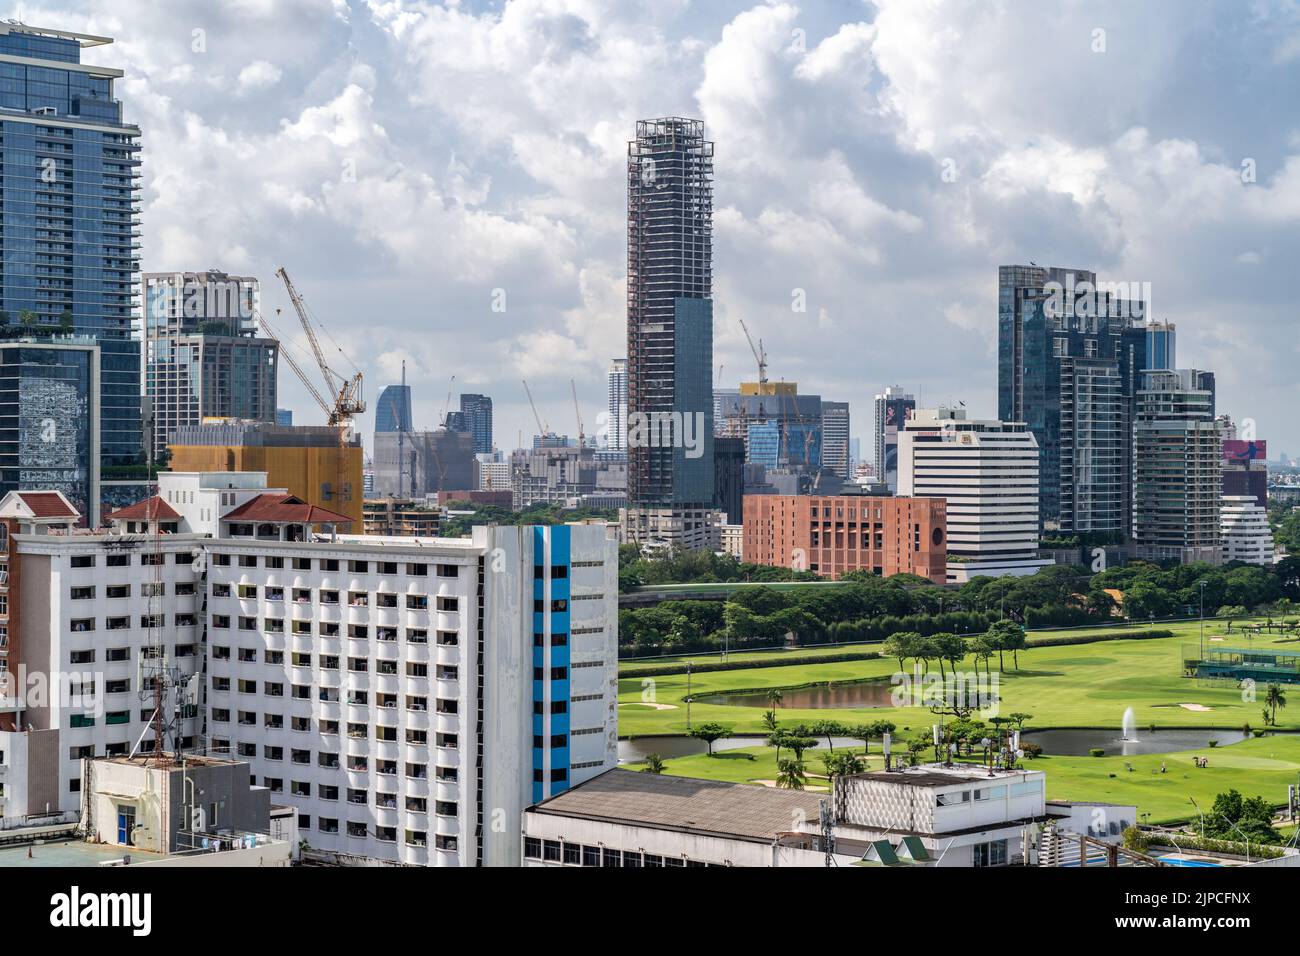 Bangkok, Thailand - 13 August 2022 - Aerial view of Bangkok cityscape in the morning showing high-rises with a golf course and cloudy blue sky Stock Photo